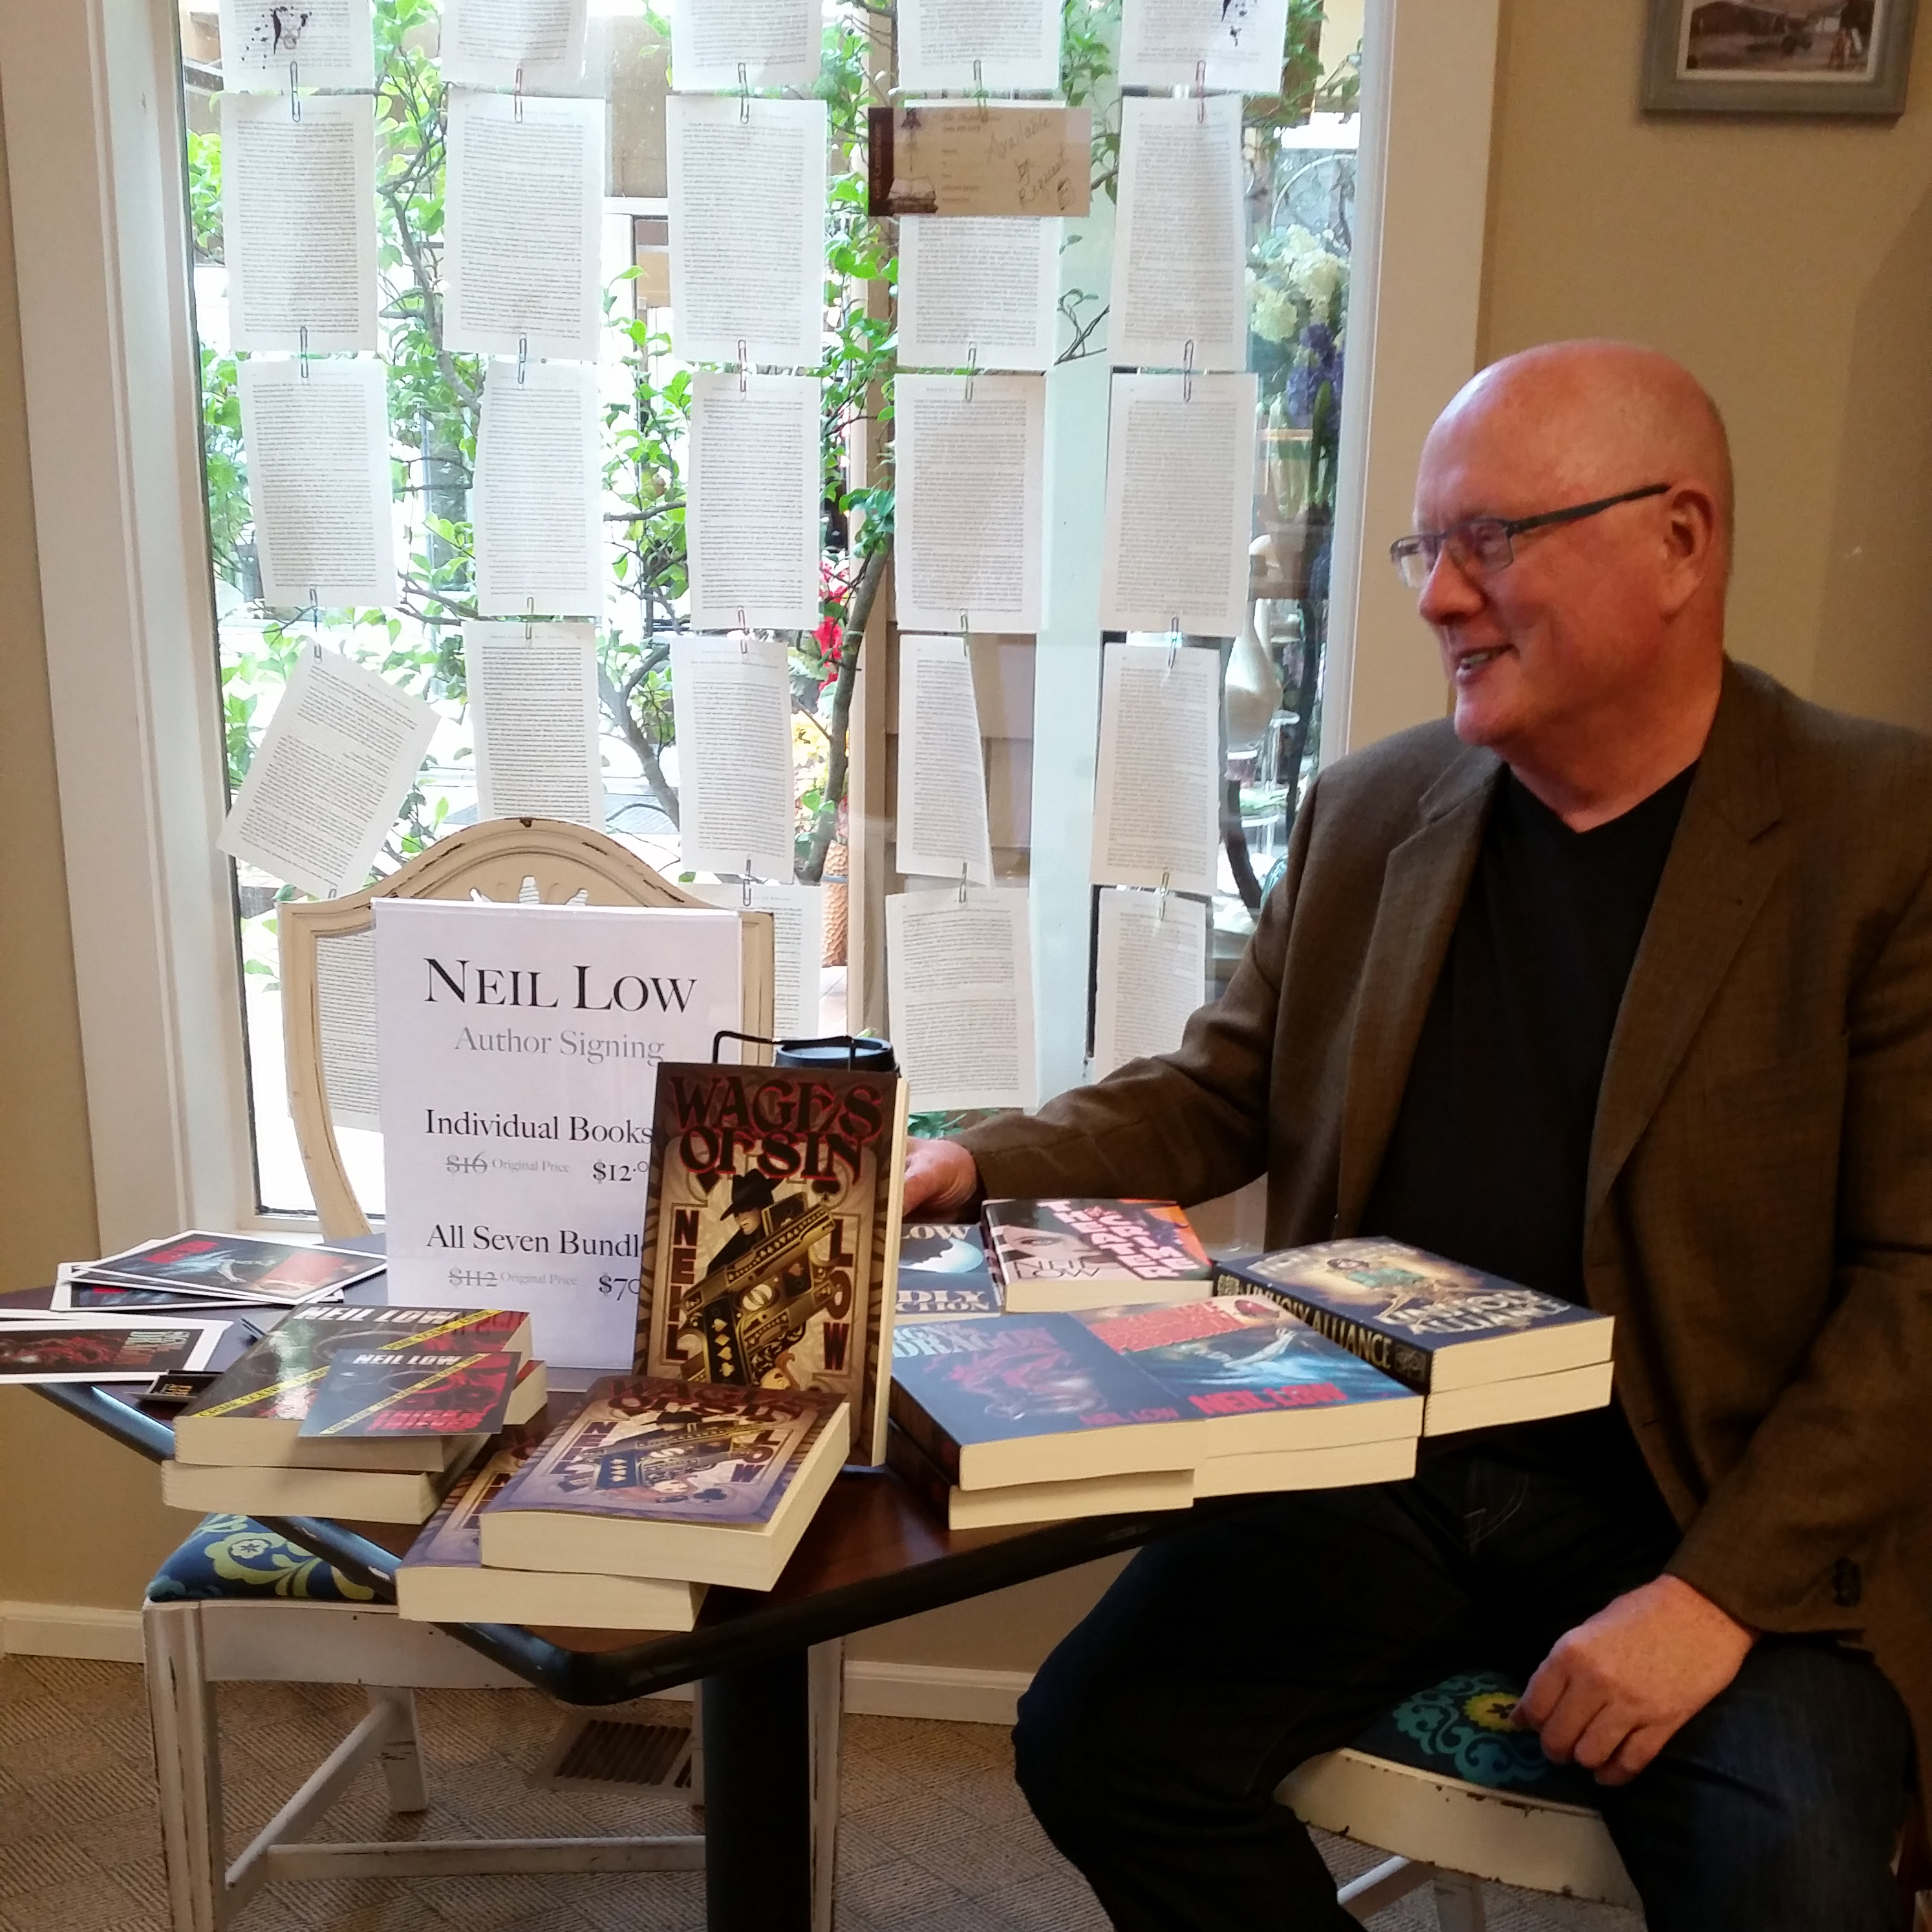 Author Neil Low With His Novels On The Table